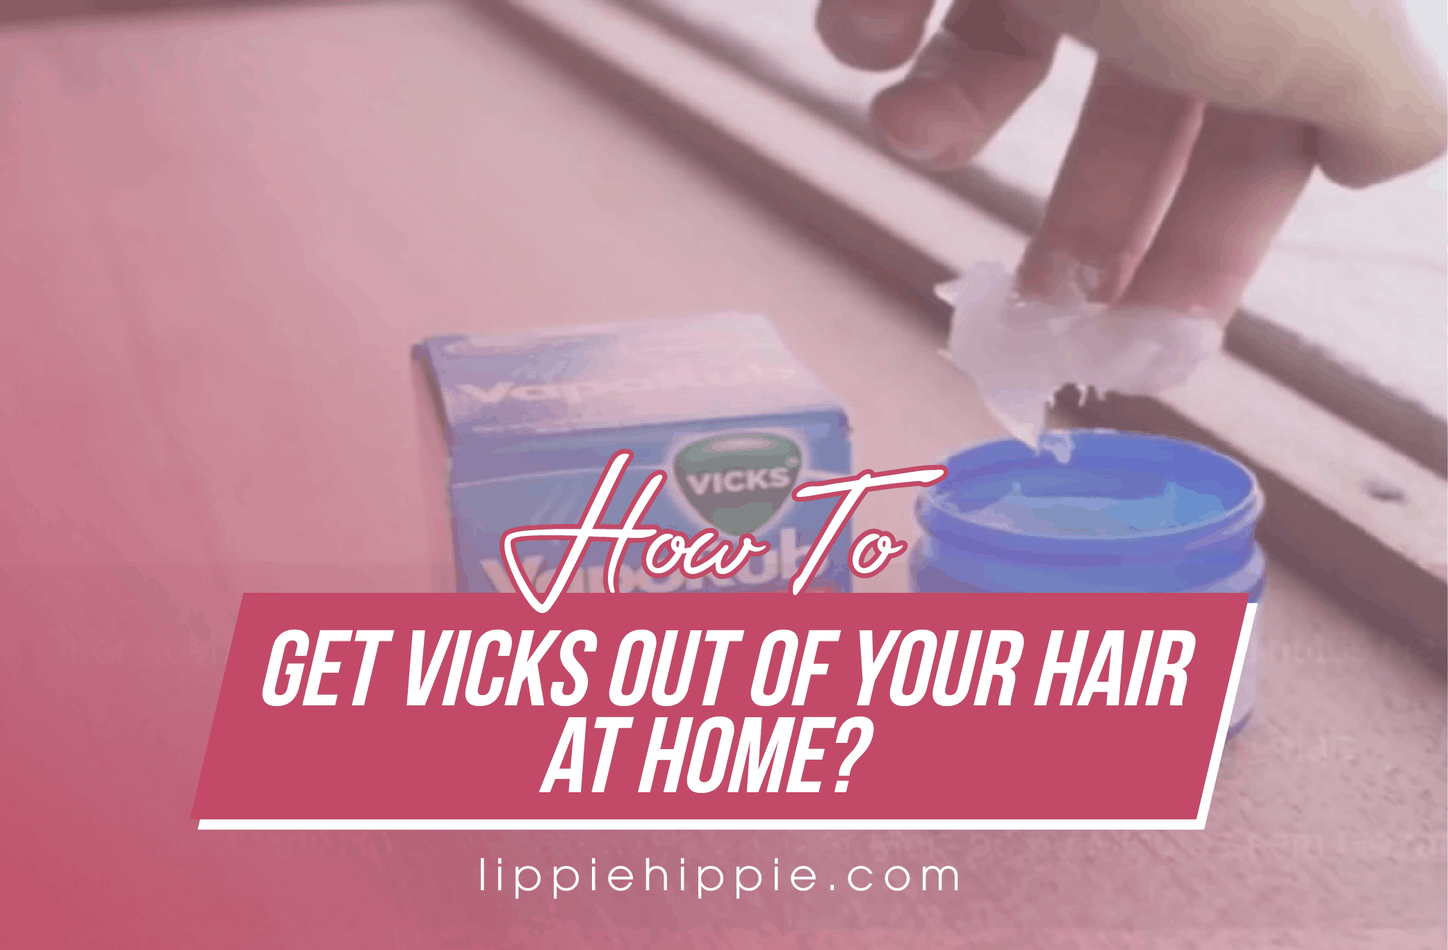 Only 6 Steps to Get Vicks Out Of Your Hair at home